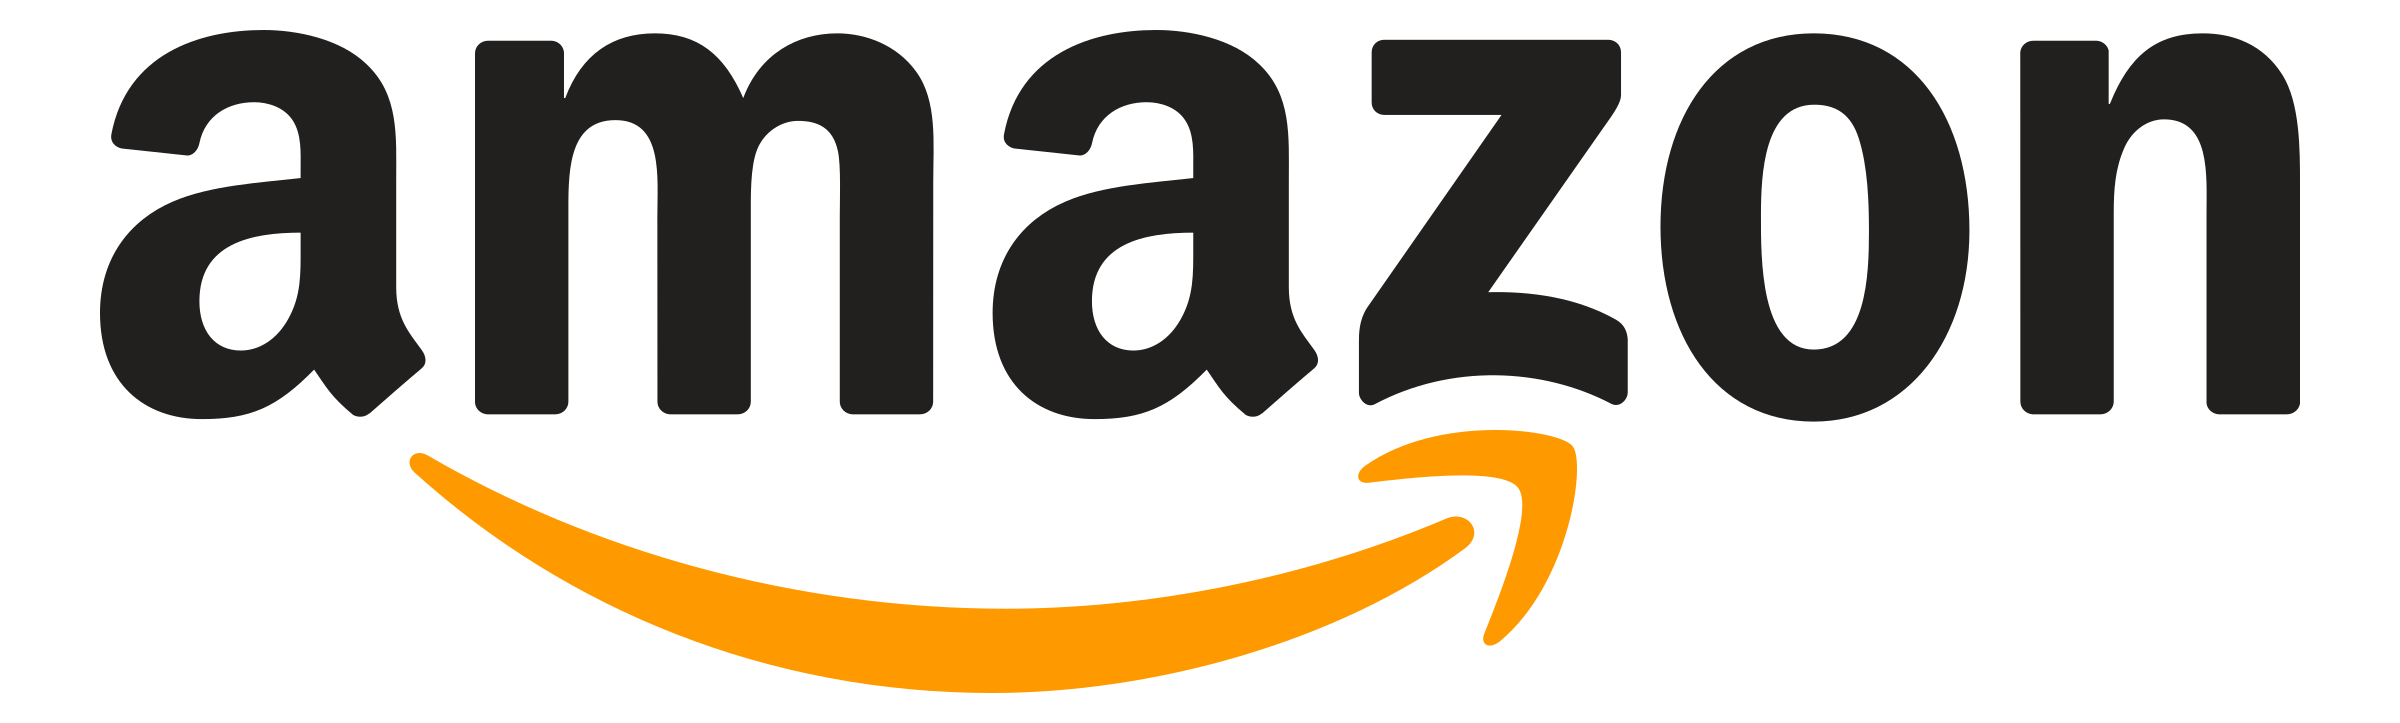 Image result for amazon logo png